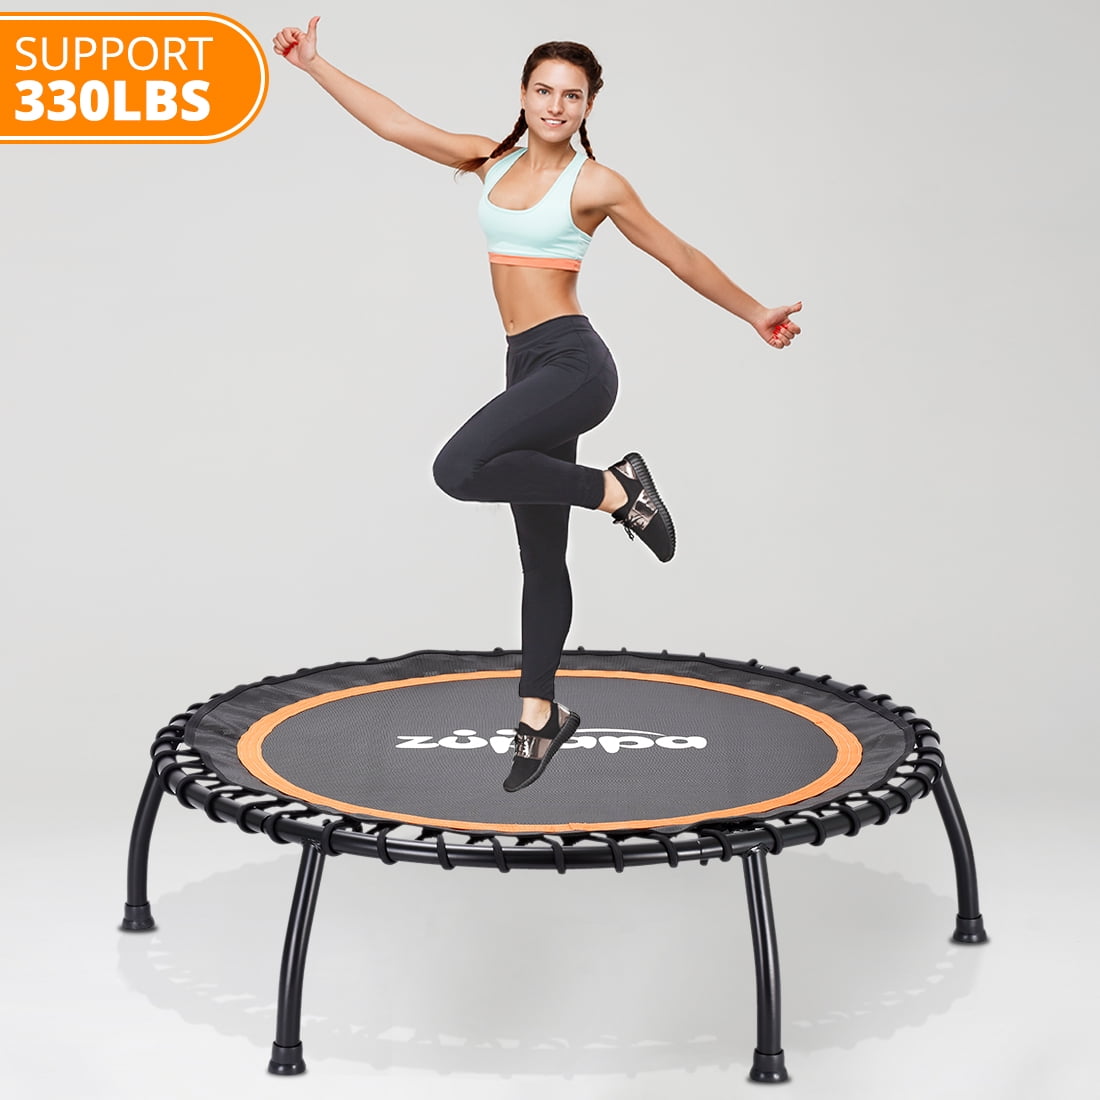 40" Mini Trampoline Rebounder Safety Net Pad Fitness Gym Home Exercise 330lbs 